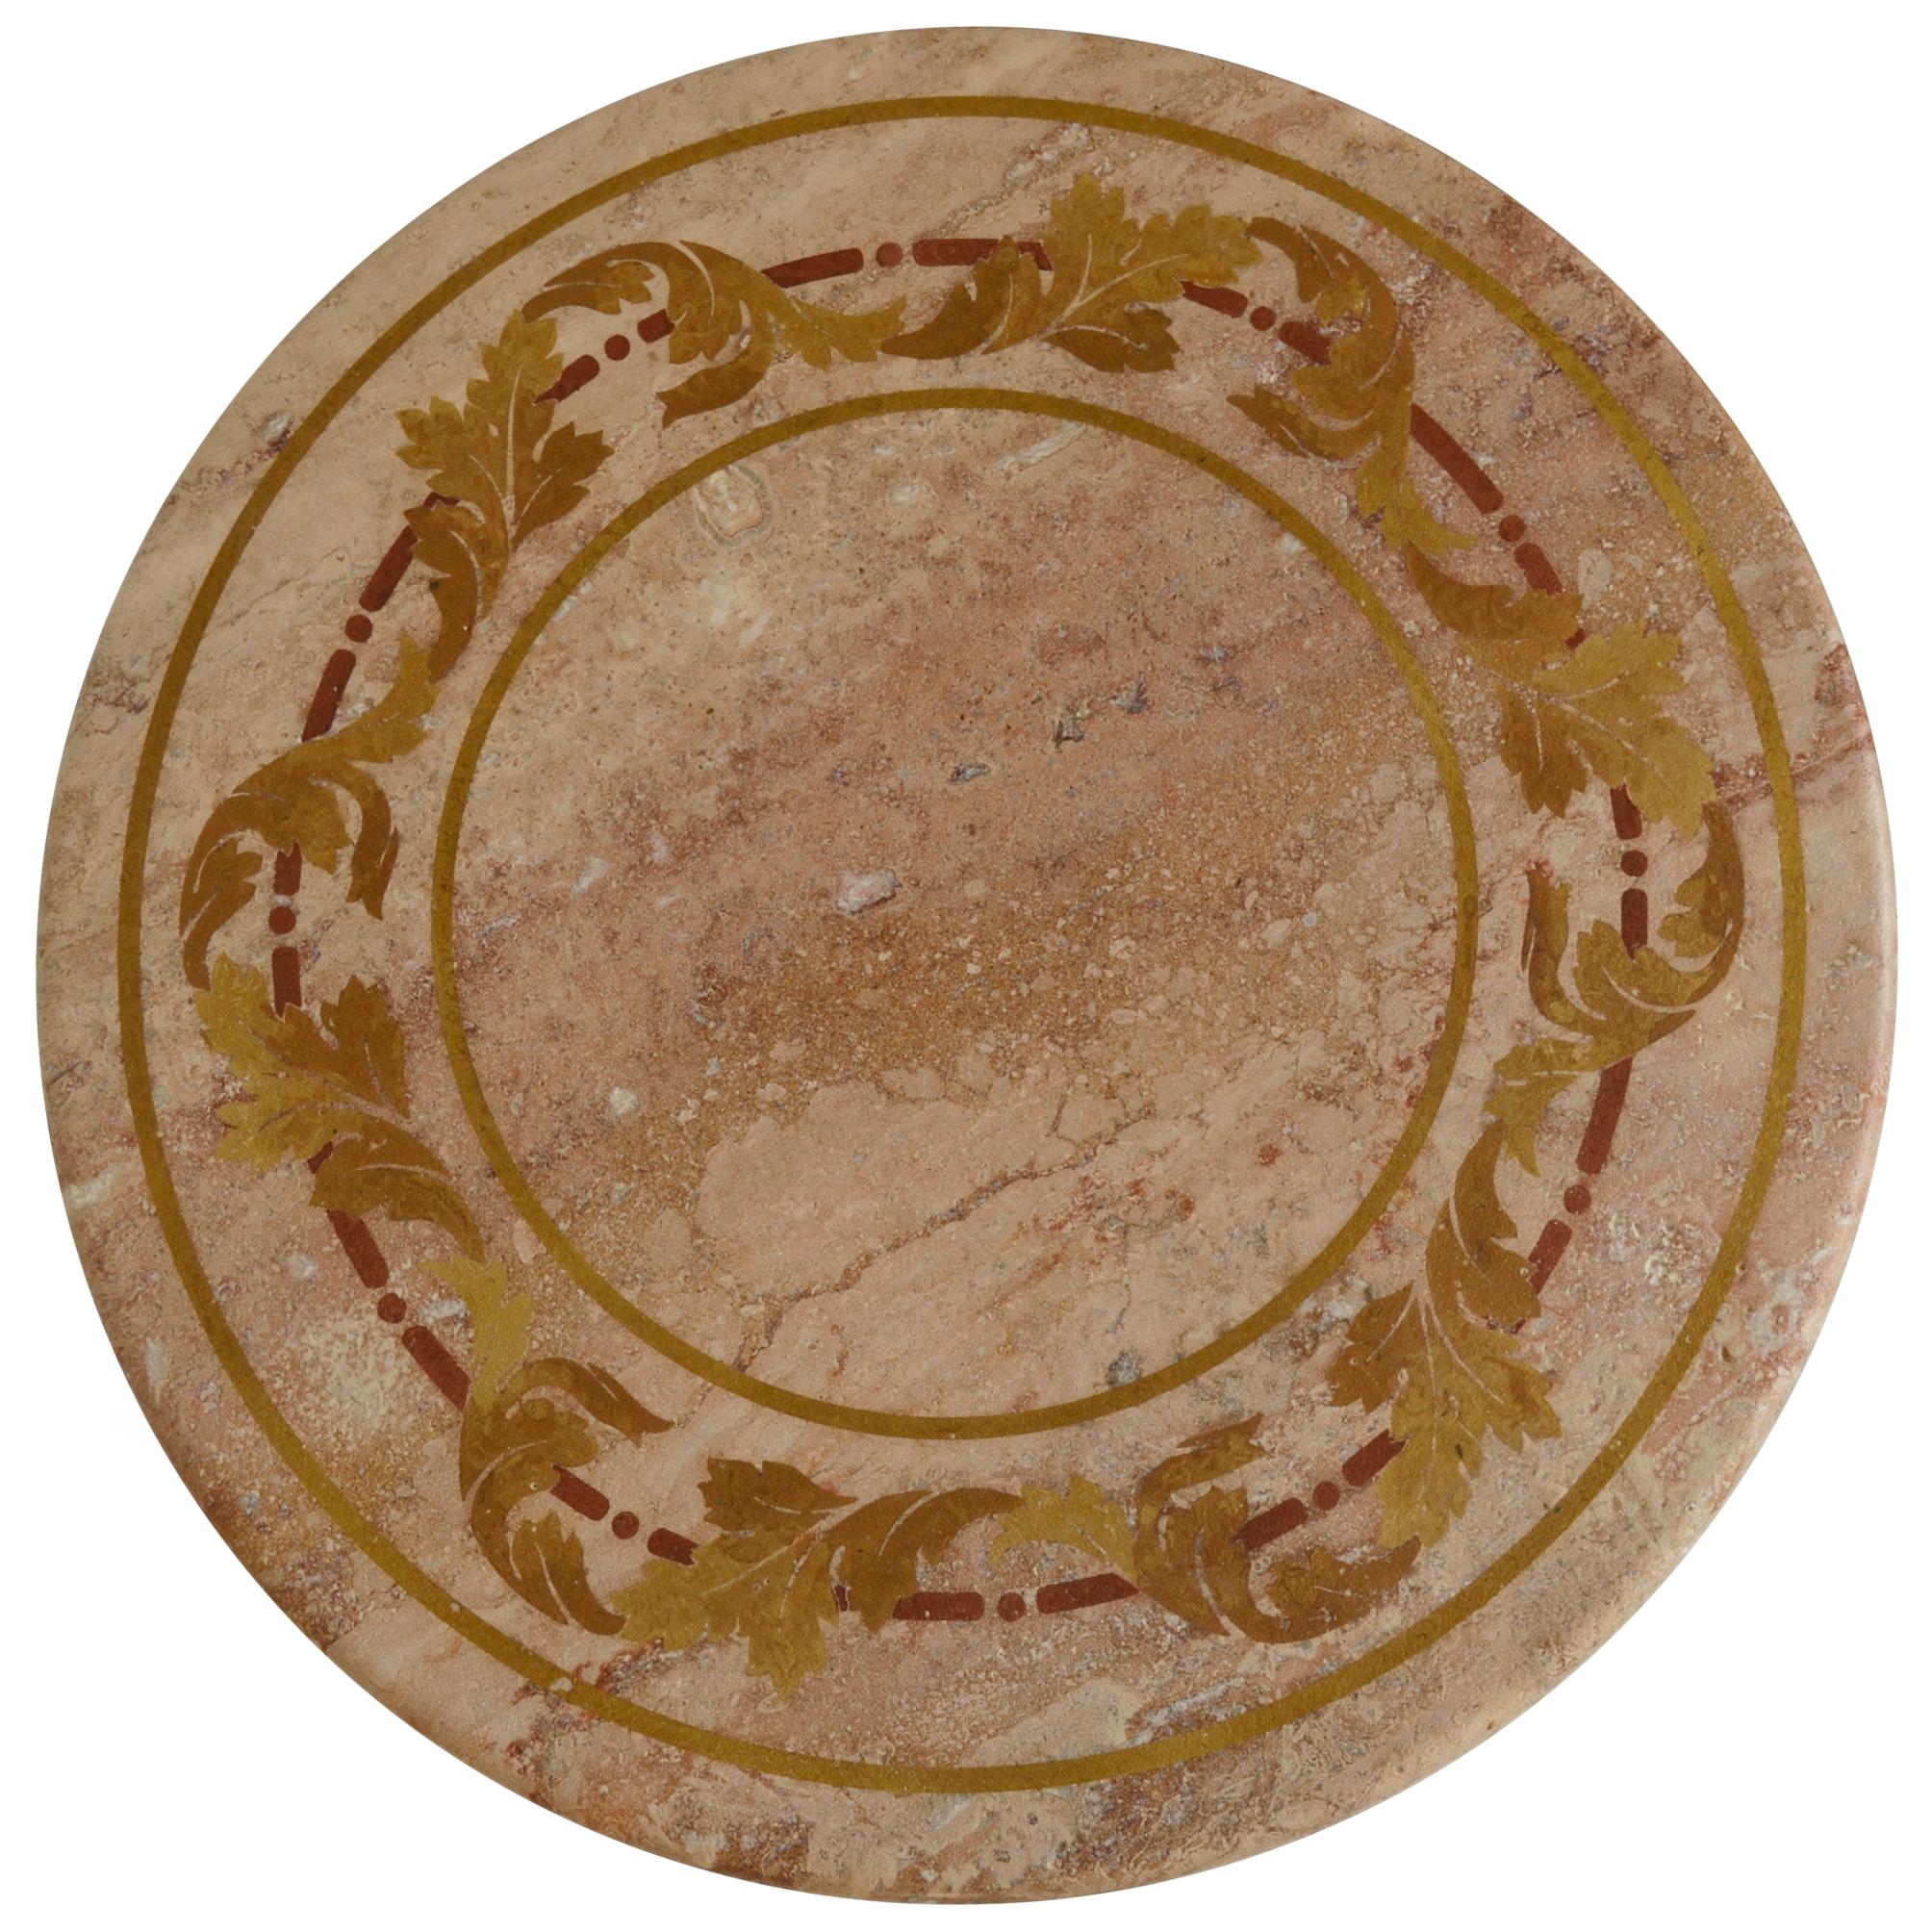 This table can be used as tea table, side table, lamp table it has multiple uses.
The top is manufactured in Travertine decorated with scagliola art inlays, technique of the 16th century.
The acanthus leaf decoration stands on a simple iron base in